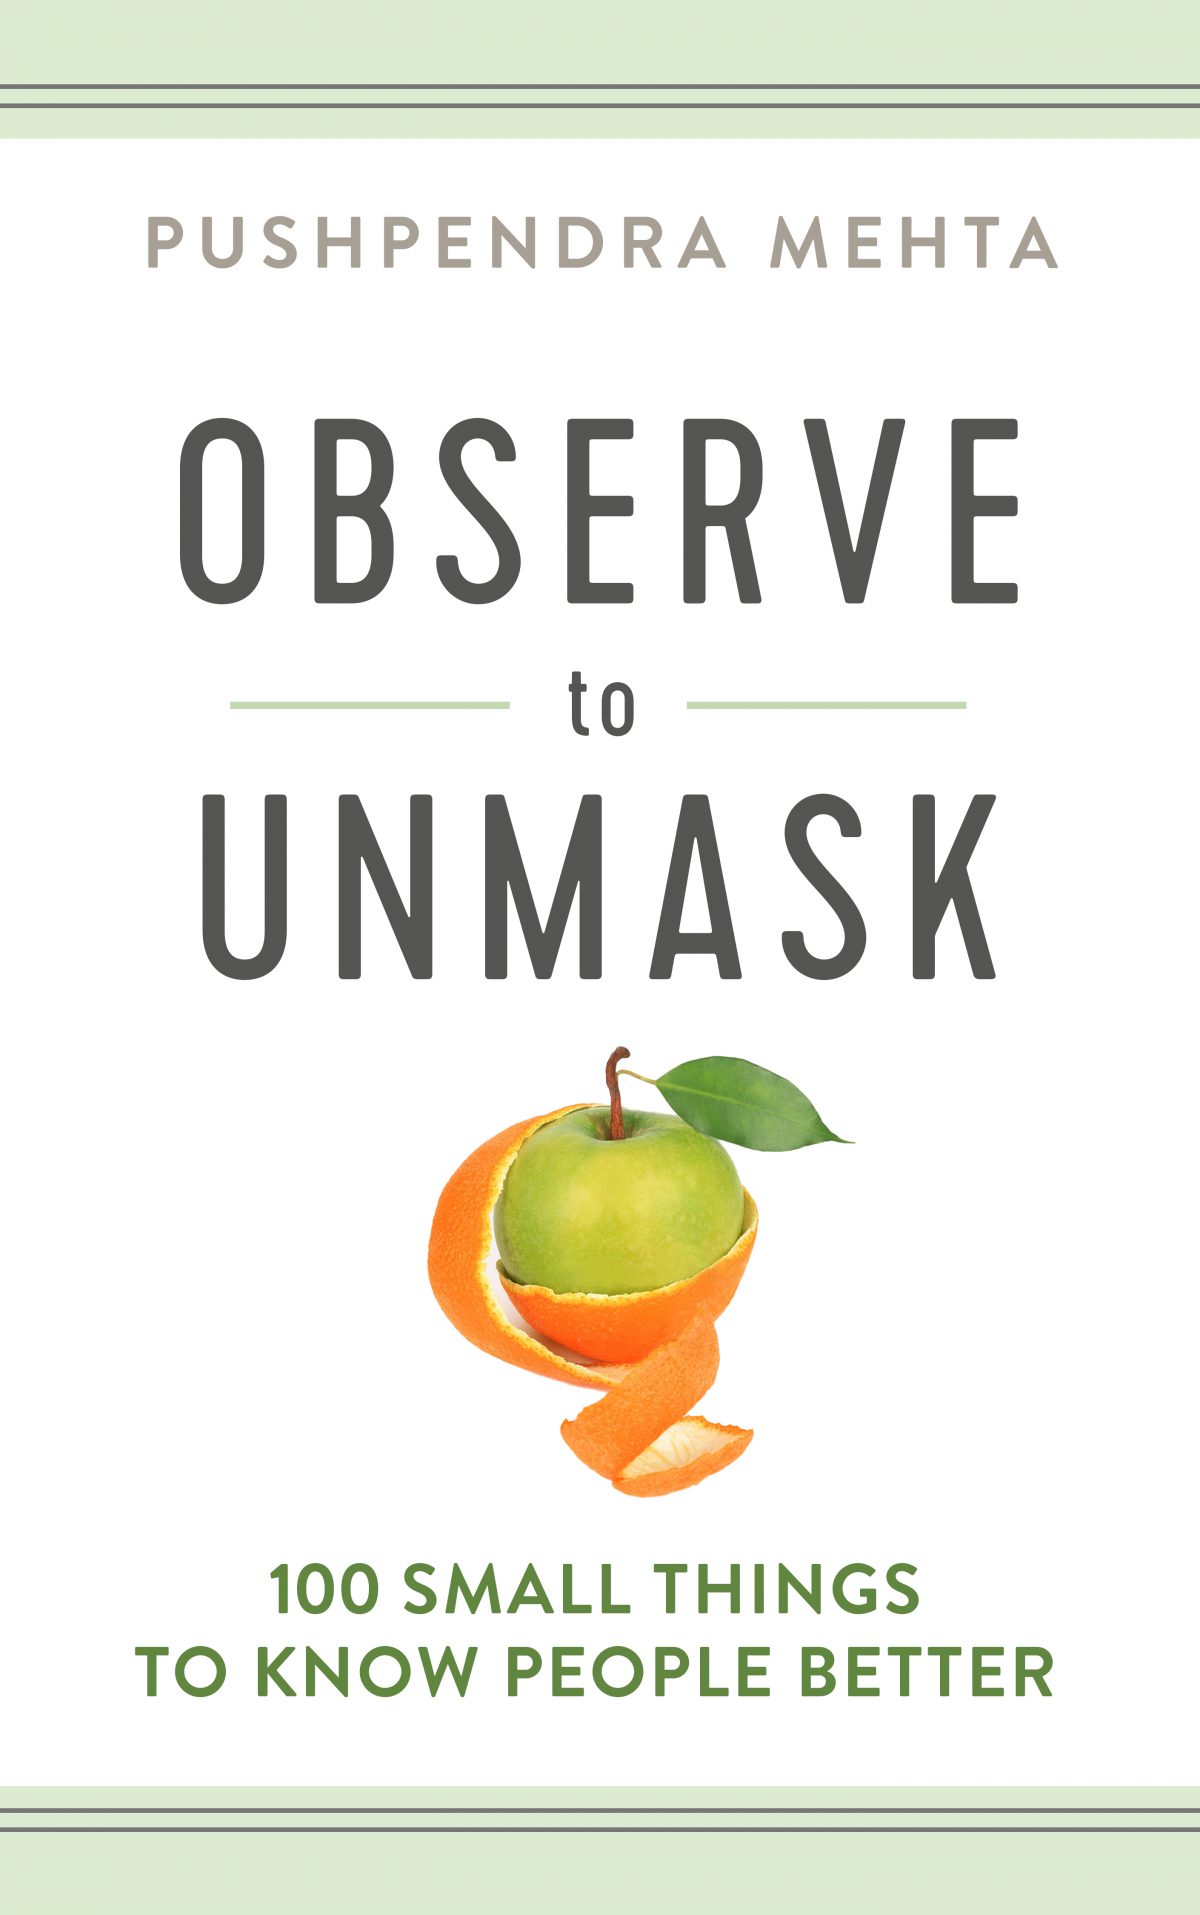 Cover of "Observe to Unmask" by Pushpendra Mehta.